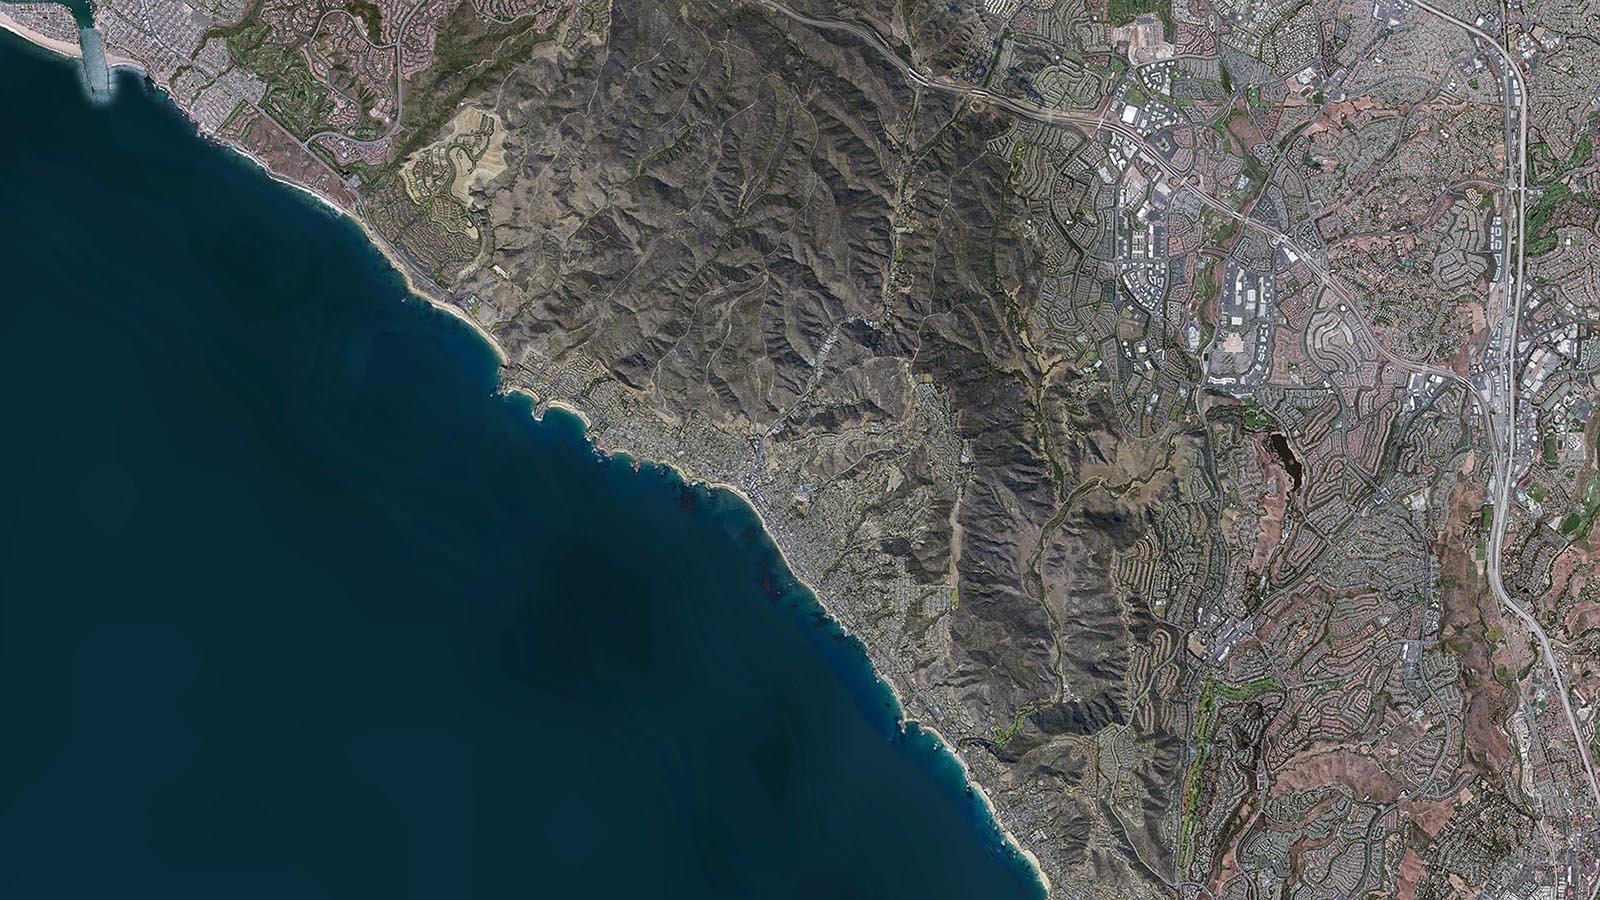 Mapping orthophoto image of the City of Laguna Beach, California overlaid on existing imagery